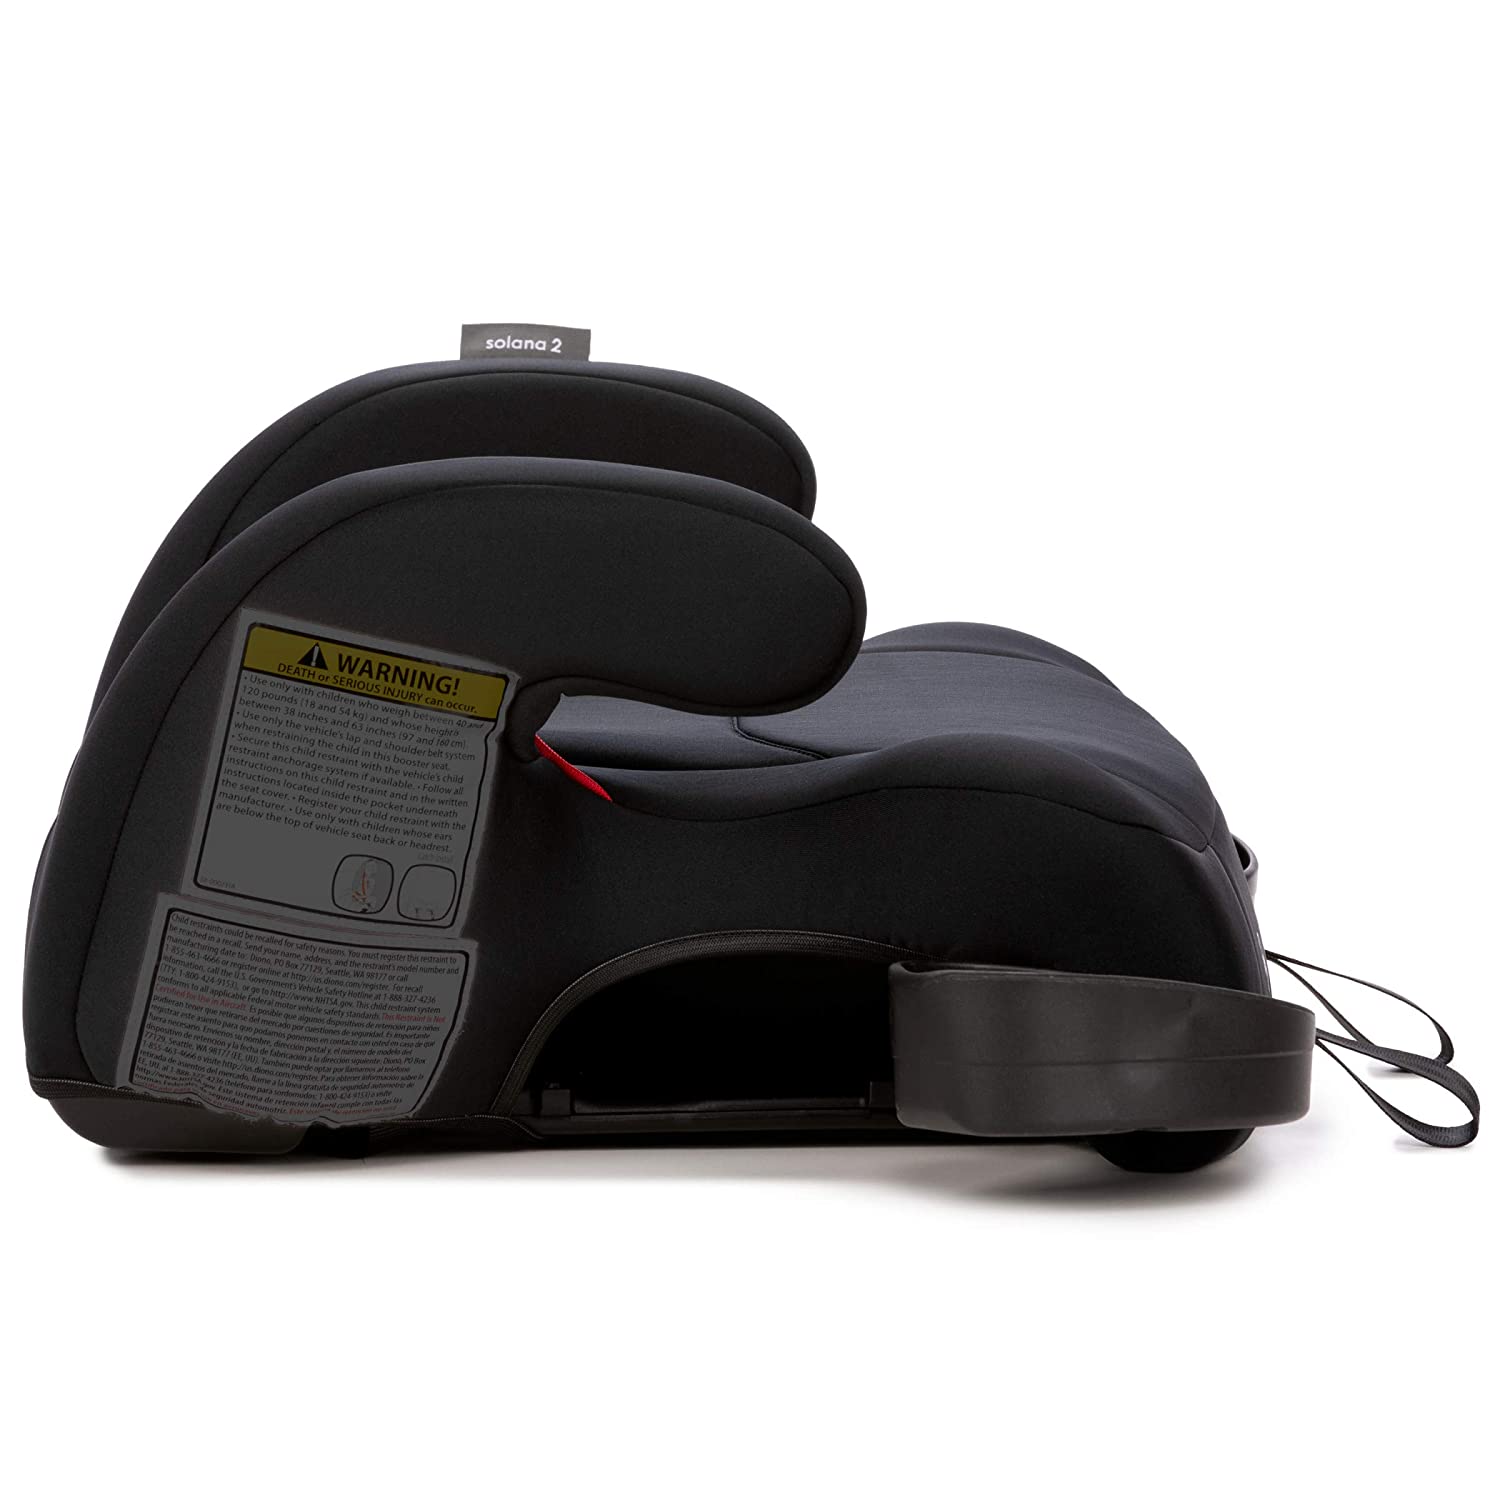 Diono Solana 2 Latch, XL Space Backless Booster Seat - ANB Baby -$20 - $50